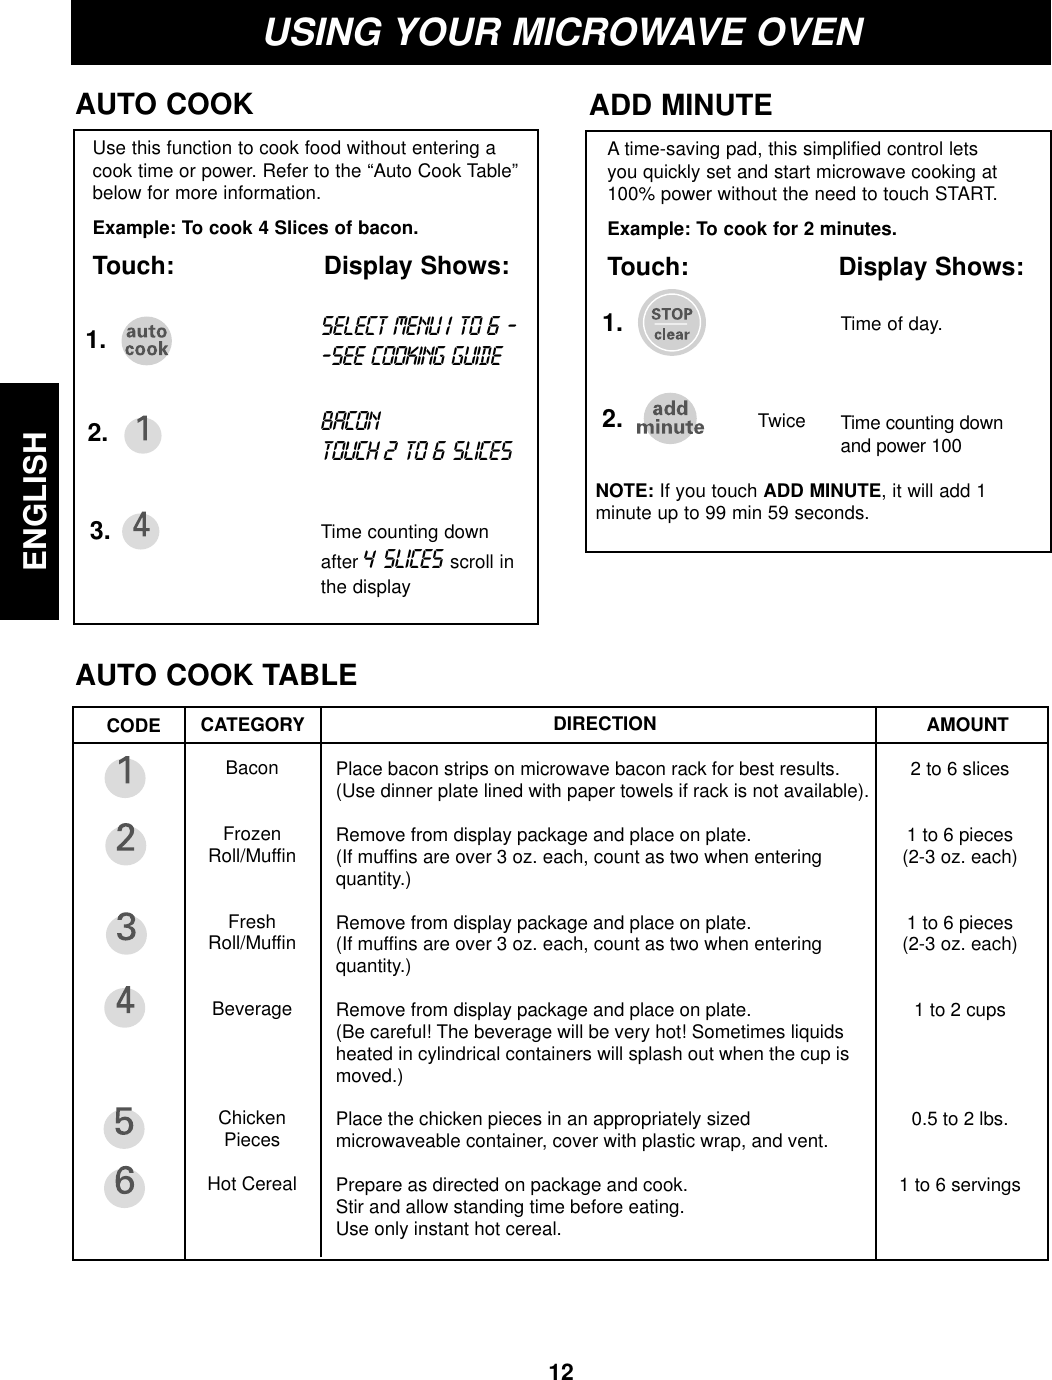 12ENGLISHTime of day.TwiceUSING YOUR MICROWAVE OVENADD MINUTEA time-saving pad, this simplified control letsyou quickly set and start microwave cooking at100% power without the need to touch START.Example: To cook for 2 minutes.Touch: Display Shows:1.2.NOTE: If you touch ADD MINUTE, it will add 1minute up to 99 min 59 seconds.Time counting downand power 100AUTO COOKAUTO COOK TABLEUse this function to cook food without entering acook time or power. Refer to the “Auto Cook Table”below for more information.Example: To cook 4 Slices of bacon.Touch: Display Shows:1.Time counting downafter 4SLICESscroll inthe display2.BACON TOUCH 2TO 6SLICES3.SELECT MENU1 TO 6 --SEE COOKING GUIDE DIRECTIONCODE CATEGORYBaconFrozenRoll/MuffinFreshRoll/MuffinBeverageChickenPiecesHot Cereal AMOUNT2 to 6 slices1 to 6 pieces(2-3 oz. each)1 to 6 pieces(2-3 oz. each)1 to 2 cups0.5 to 2 lbs.1 to 6 servingsPlace bacon strips on microwave bacon rack for best results.(Use dinner plate lined with paper towels if rack is not available).Remove from display package and place on plate.(If muffins are over 3 oz. each, count as two when enteringquantity.)Remove from display package and place on plate.(If muffins are over 3 oz. each, count as two when enteringquantity.)Remove from display package and place on plate.(Be careful! The beverage will be very hot! Sometimes liquidsheated in cylindrical containers will splash out when the cup ismoved.)Place the chicken pieces in an appropriately sizedmicrowaveable container, cover with plastic wrap, and vent.Prepare as directed on package and cook.Stir and allow standing time before eating.Use only instant hot cereal.